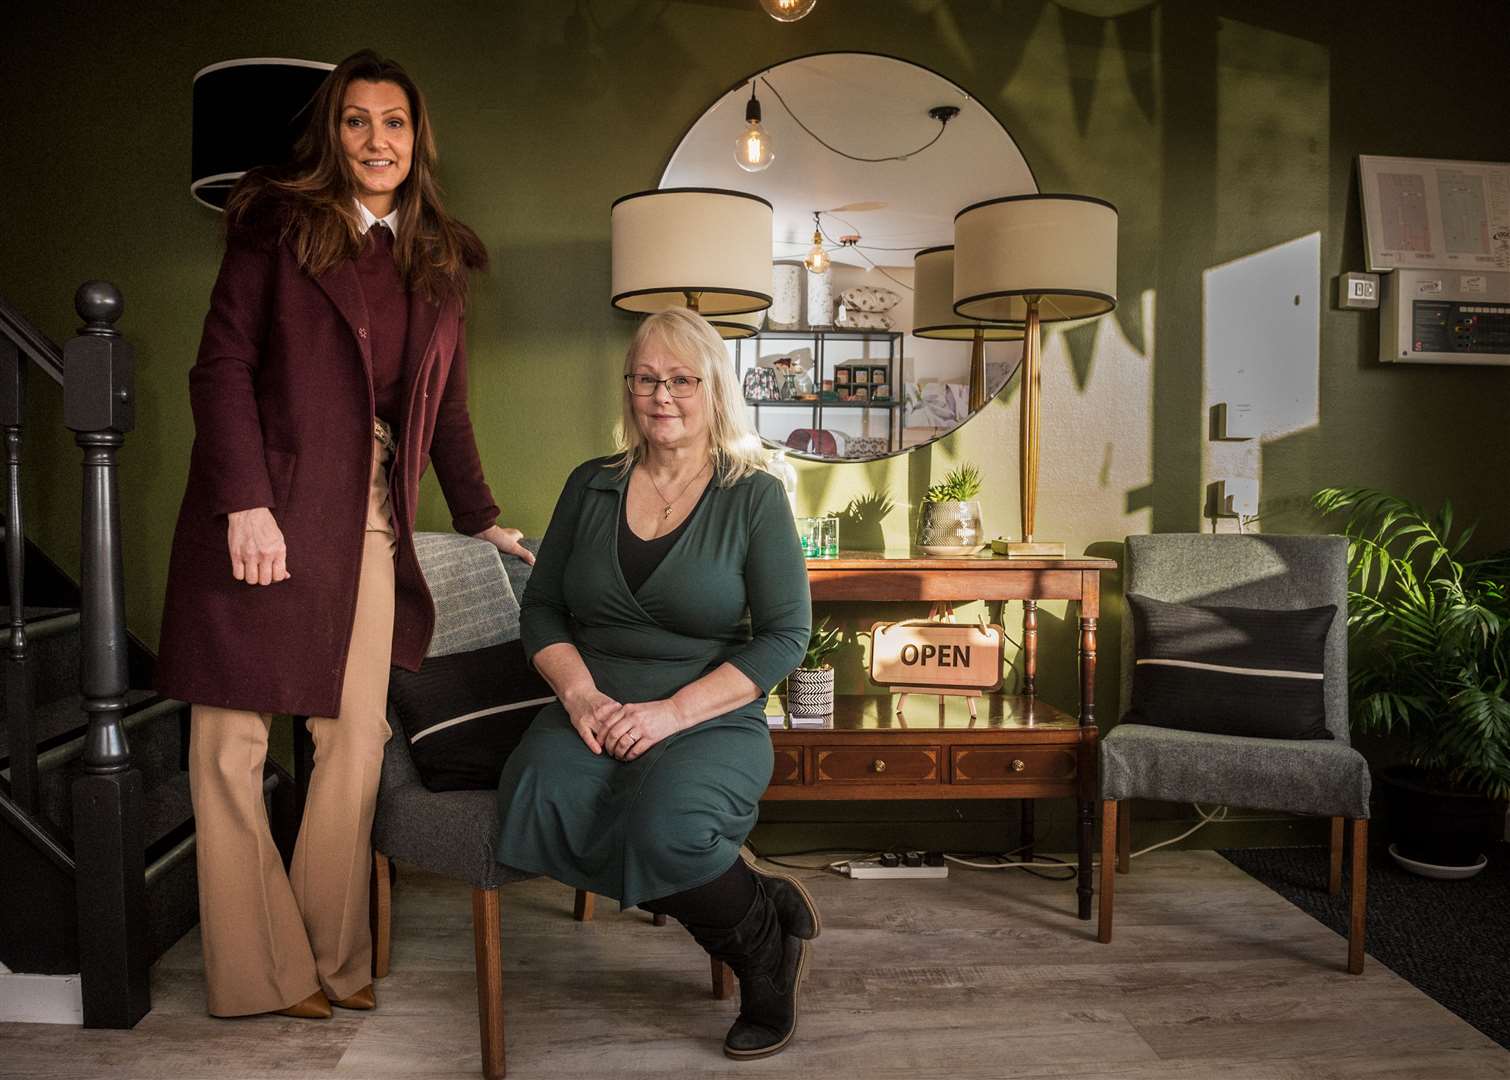 Interior designer Erica Morrison (left) teams up with Lucy Wagtail's Irene Massey to create a new line of upholstery fabrics.